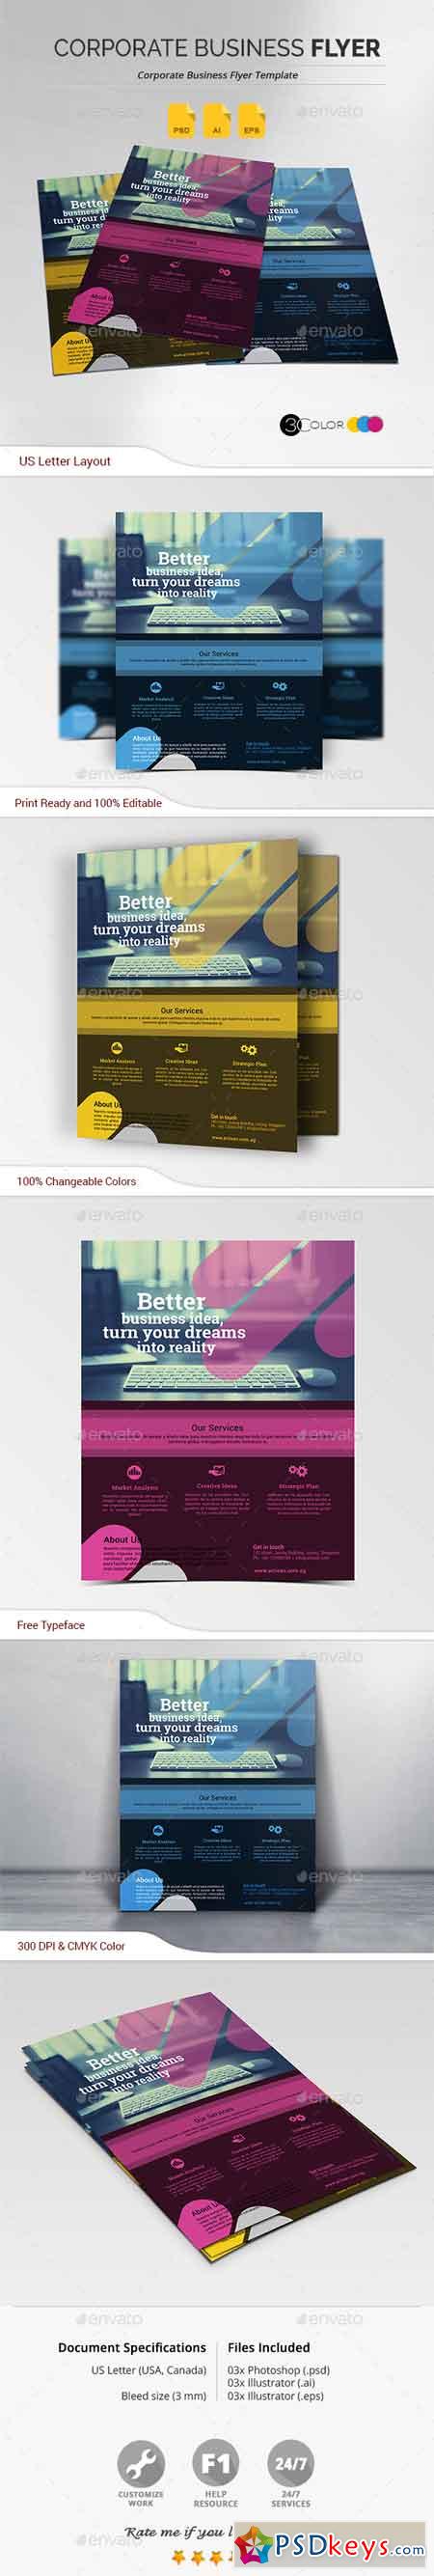 Corporate Business Flyer 18040292